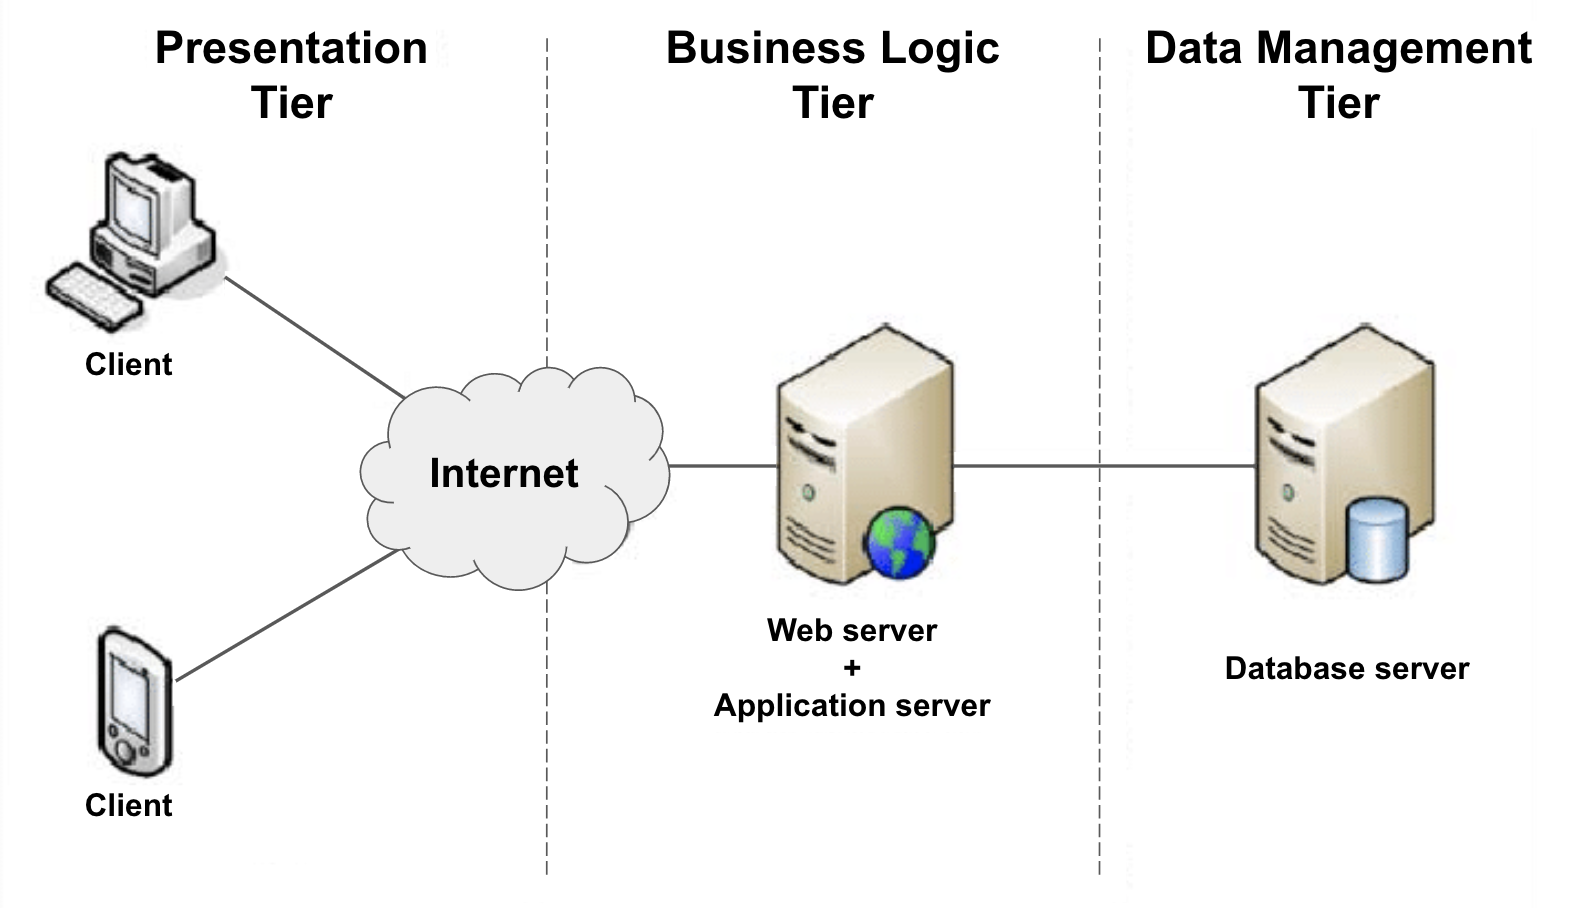 A traditional three-tiered architecture, with clearly-defined presentation, business logic, and data components.